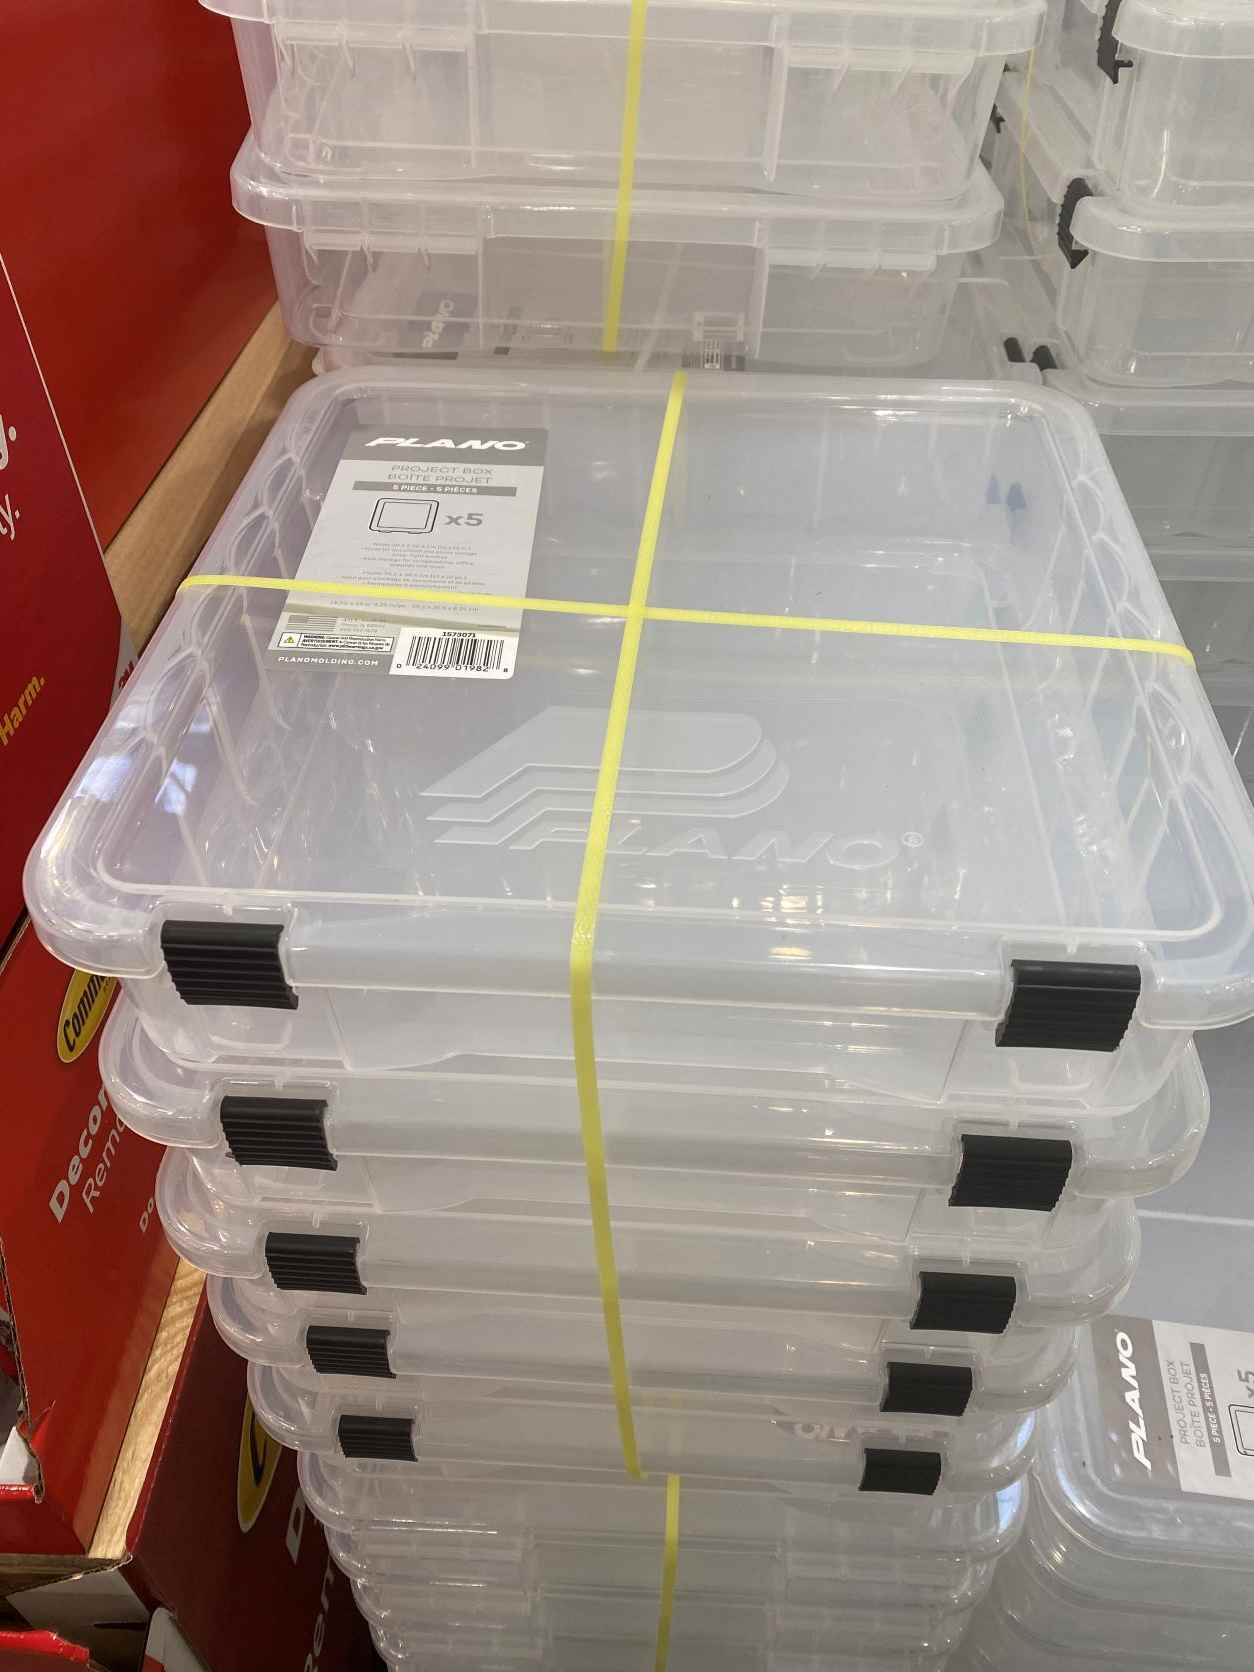 Every time I read about board game storage solutions, Plano boxes come up.  I could never bring mysef to buy one because of the price. However, I use  these fishing tackle containers